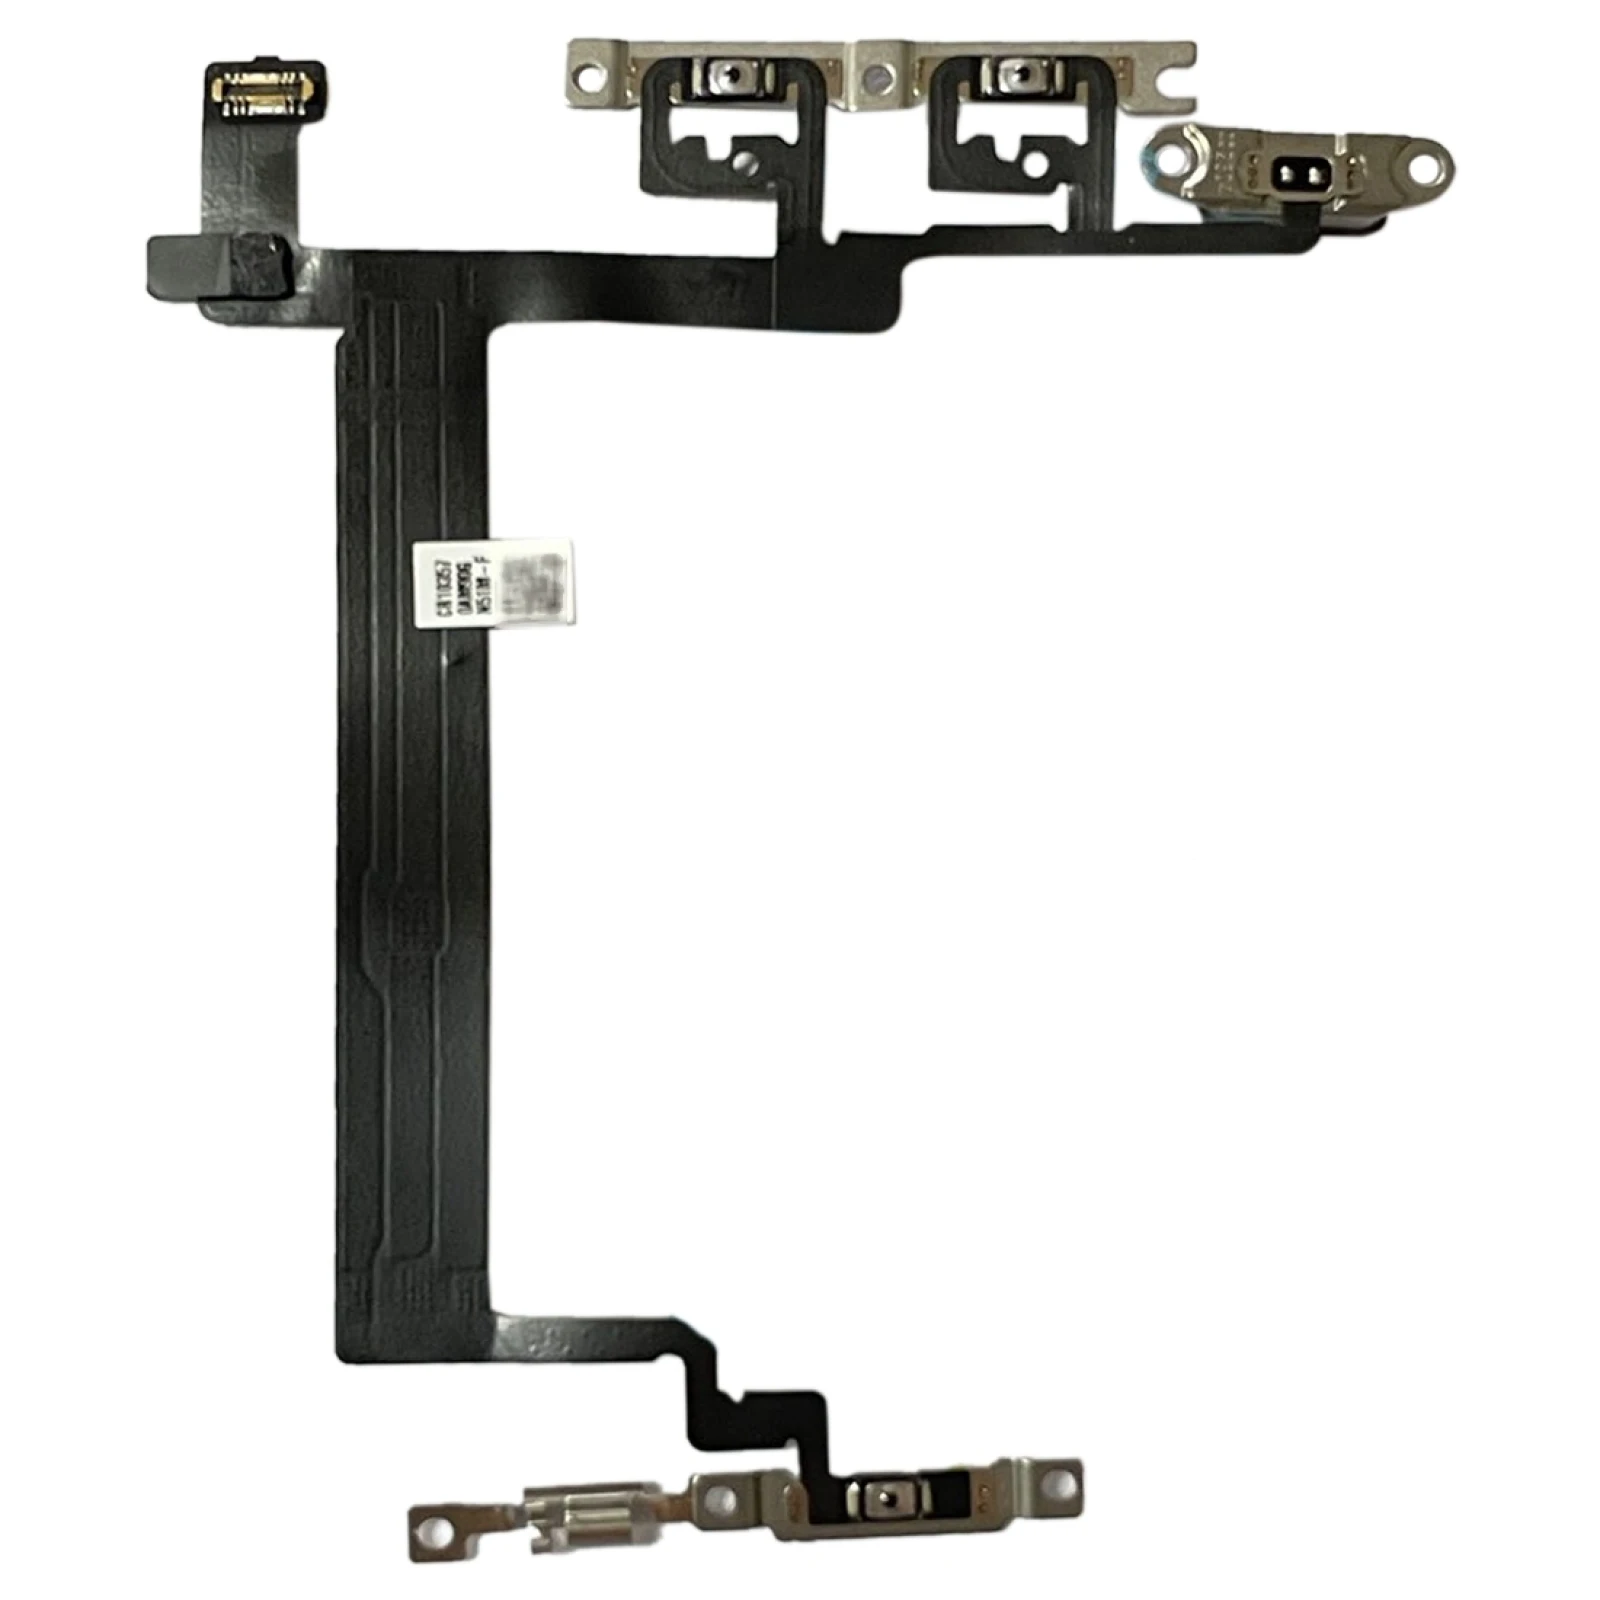 New for iPhone 13 Pro Max USB Charging Port Flex Cable for iPhone 13 Pro Max